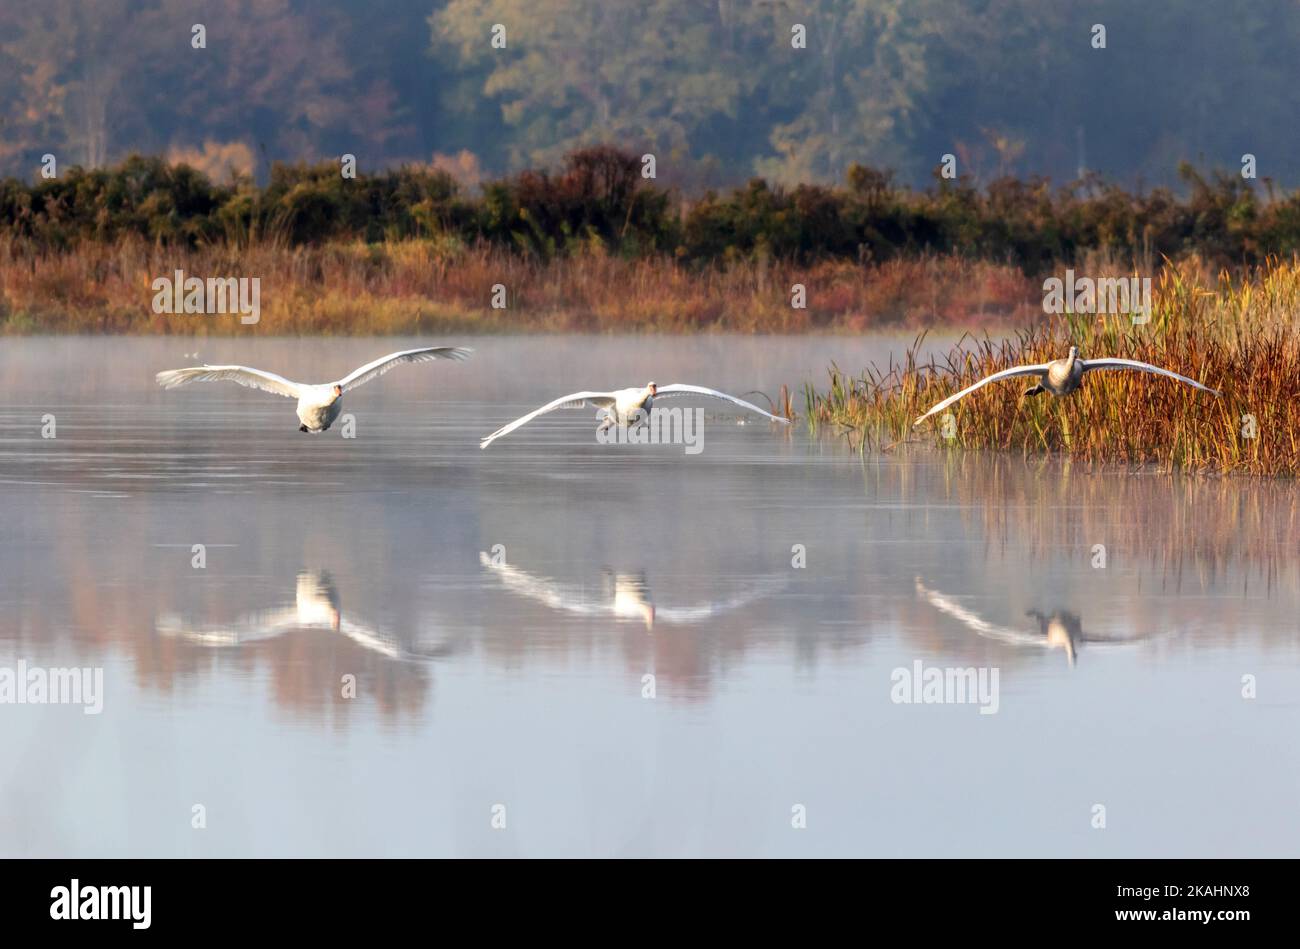 Cygnet with adult Swan prepare to land on calm quiet water with reflection on an early fall morning Stock Photo